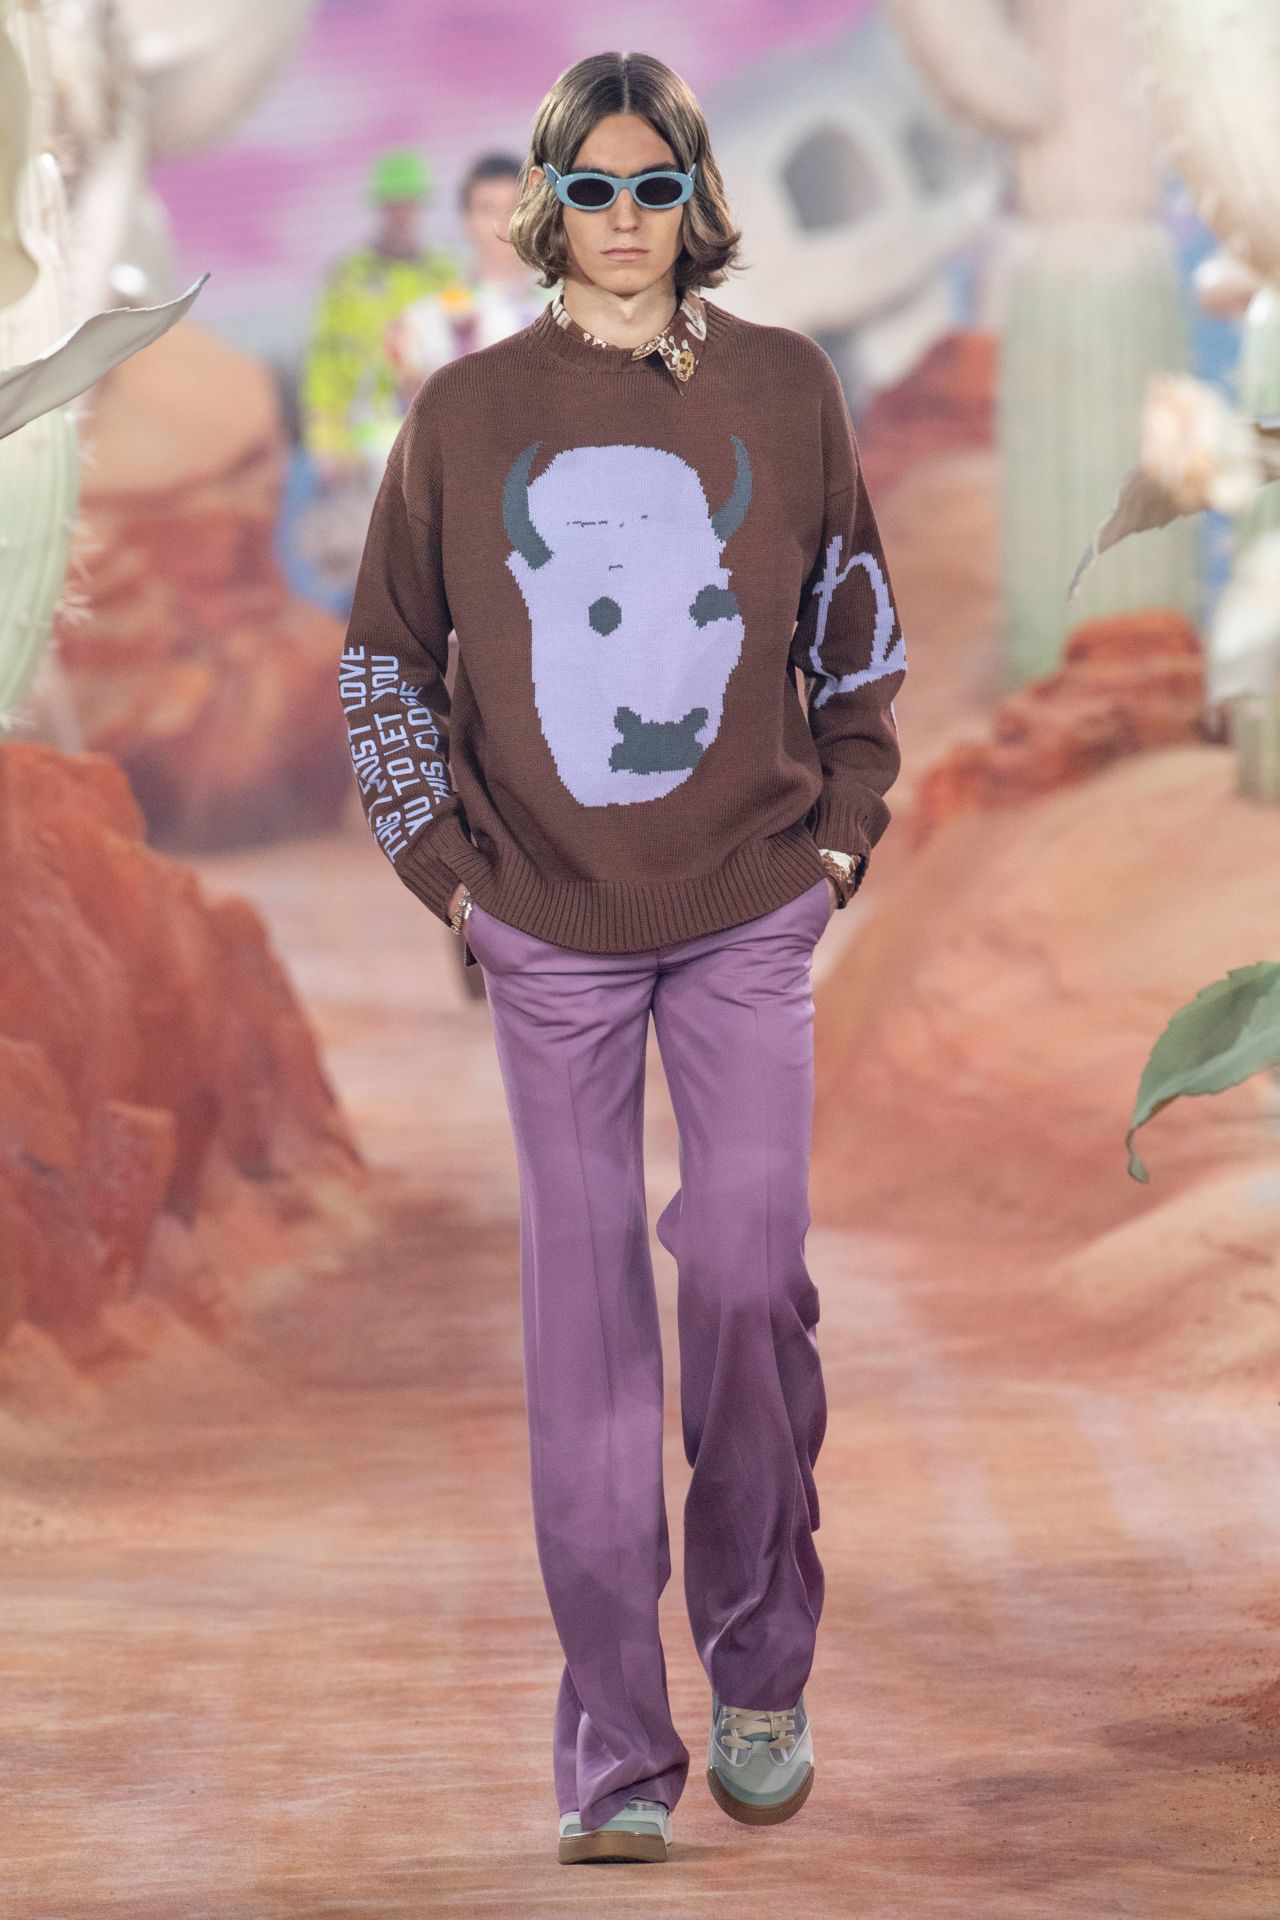 Dior collaborated with rapper Travis Scott this Spring-Summer 2022 season